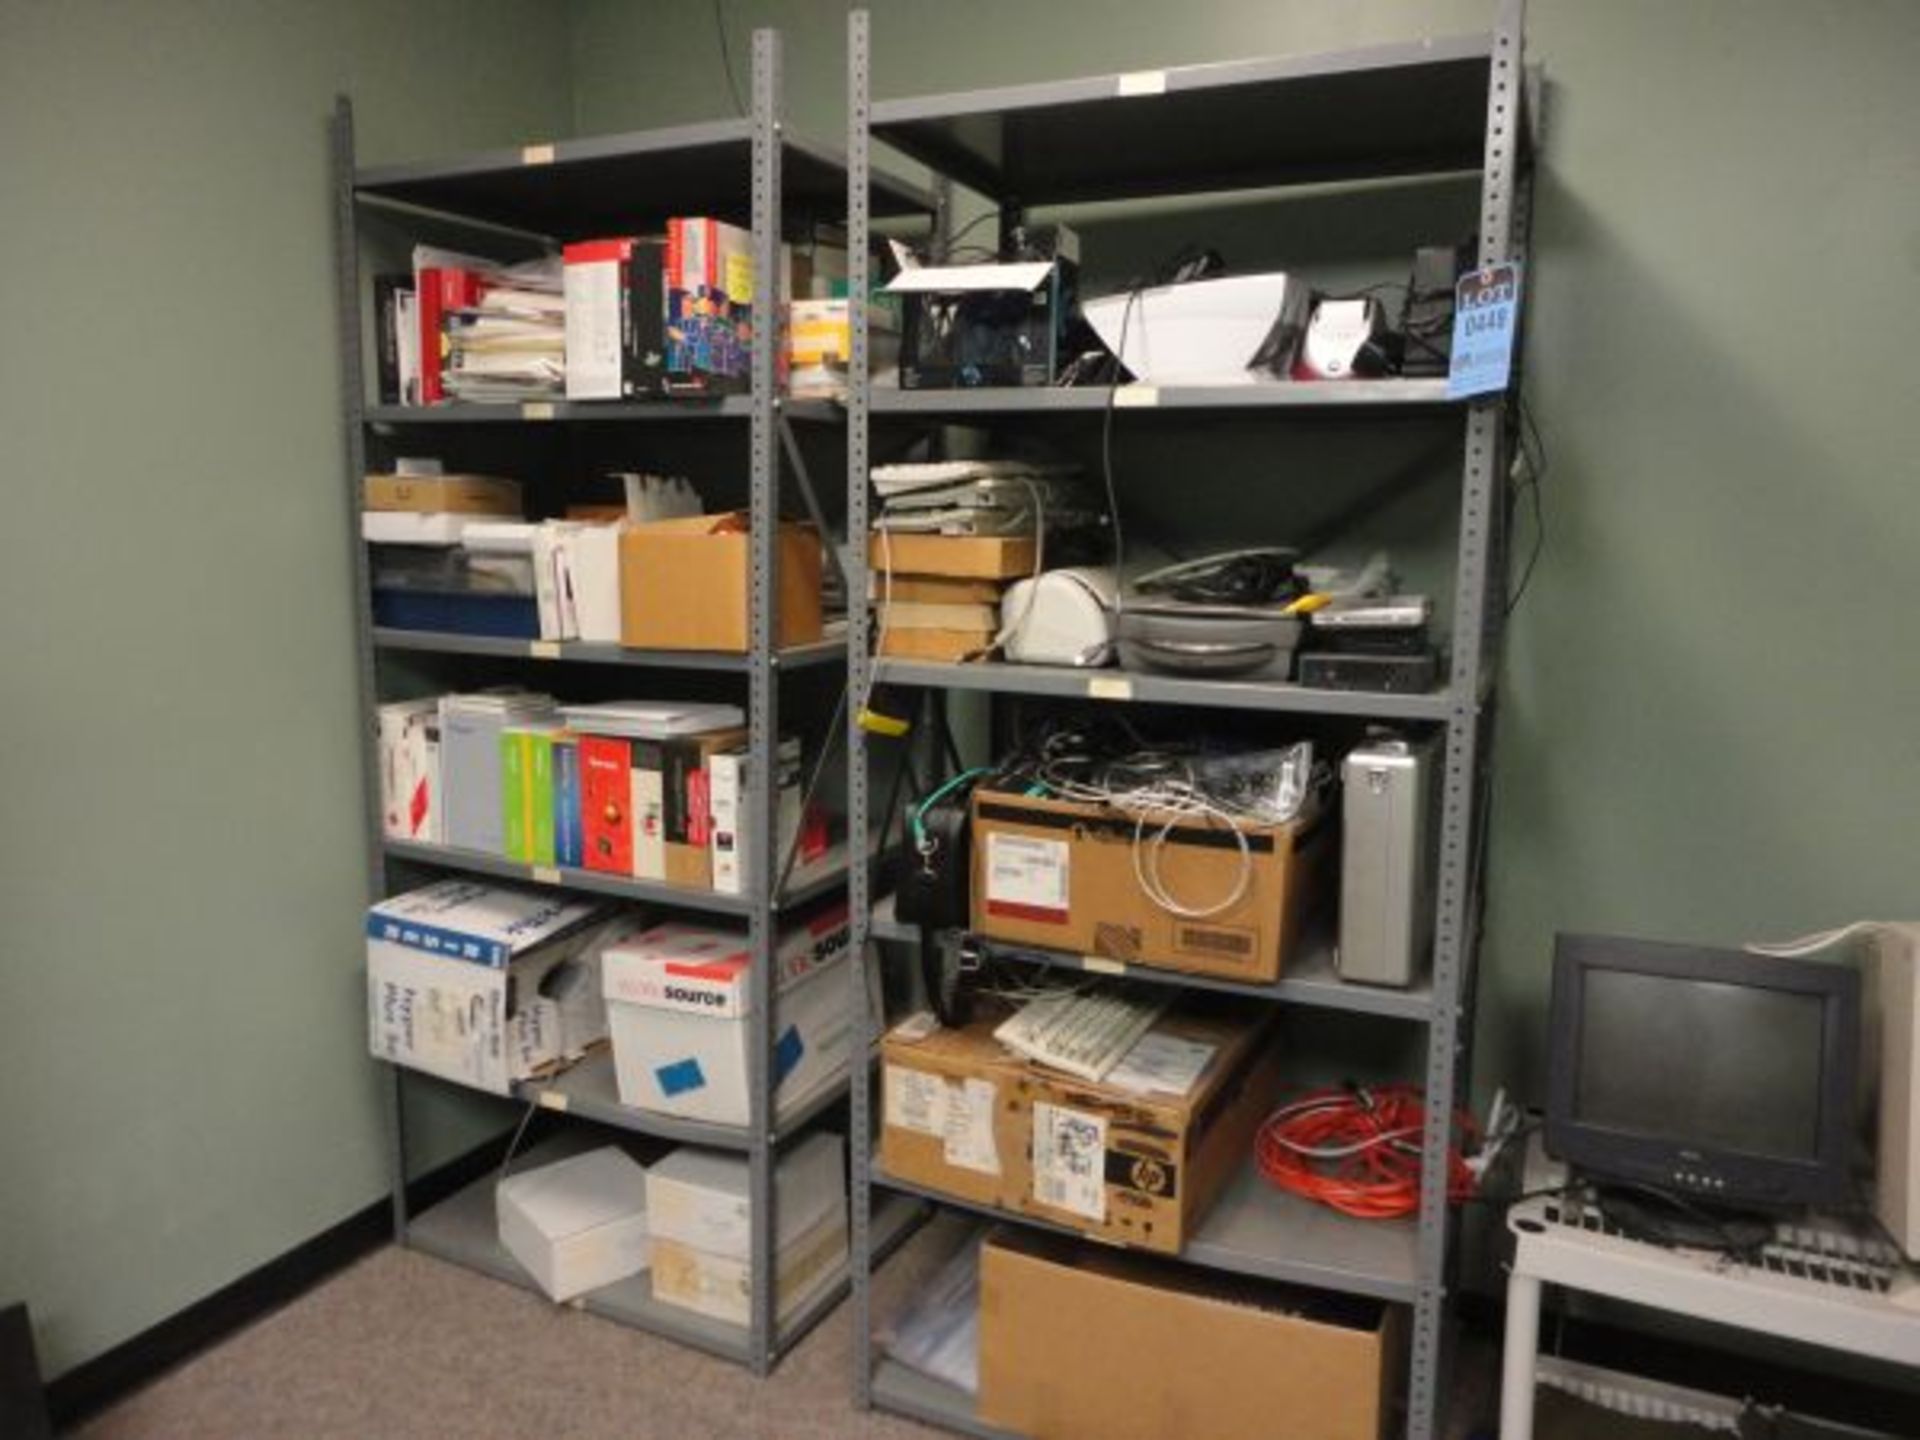 STEEL RACKS WITH CONTENTS INCLUDING COMPUTER PERIPHERALS, SOFTWARE AND WIRE - Image 2 of 2